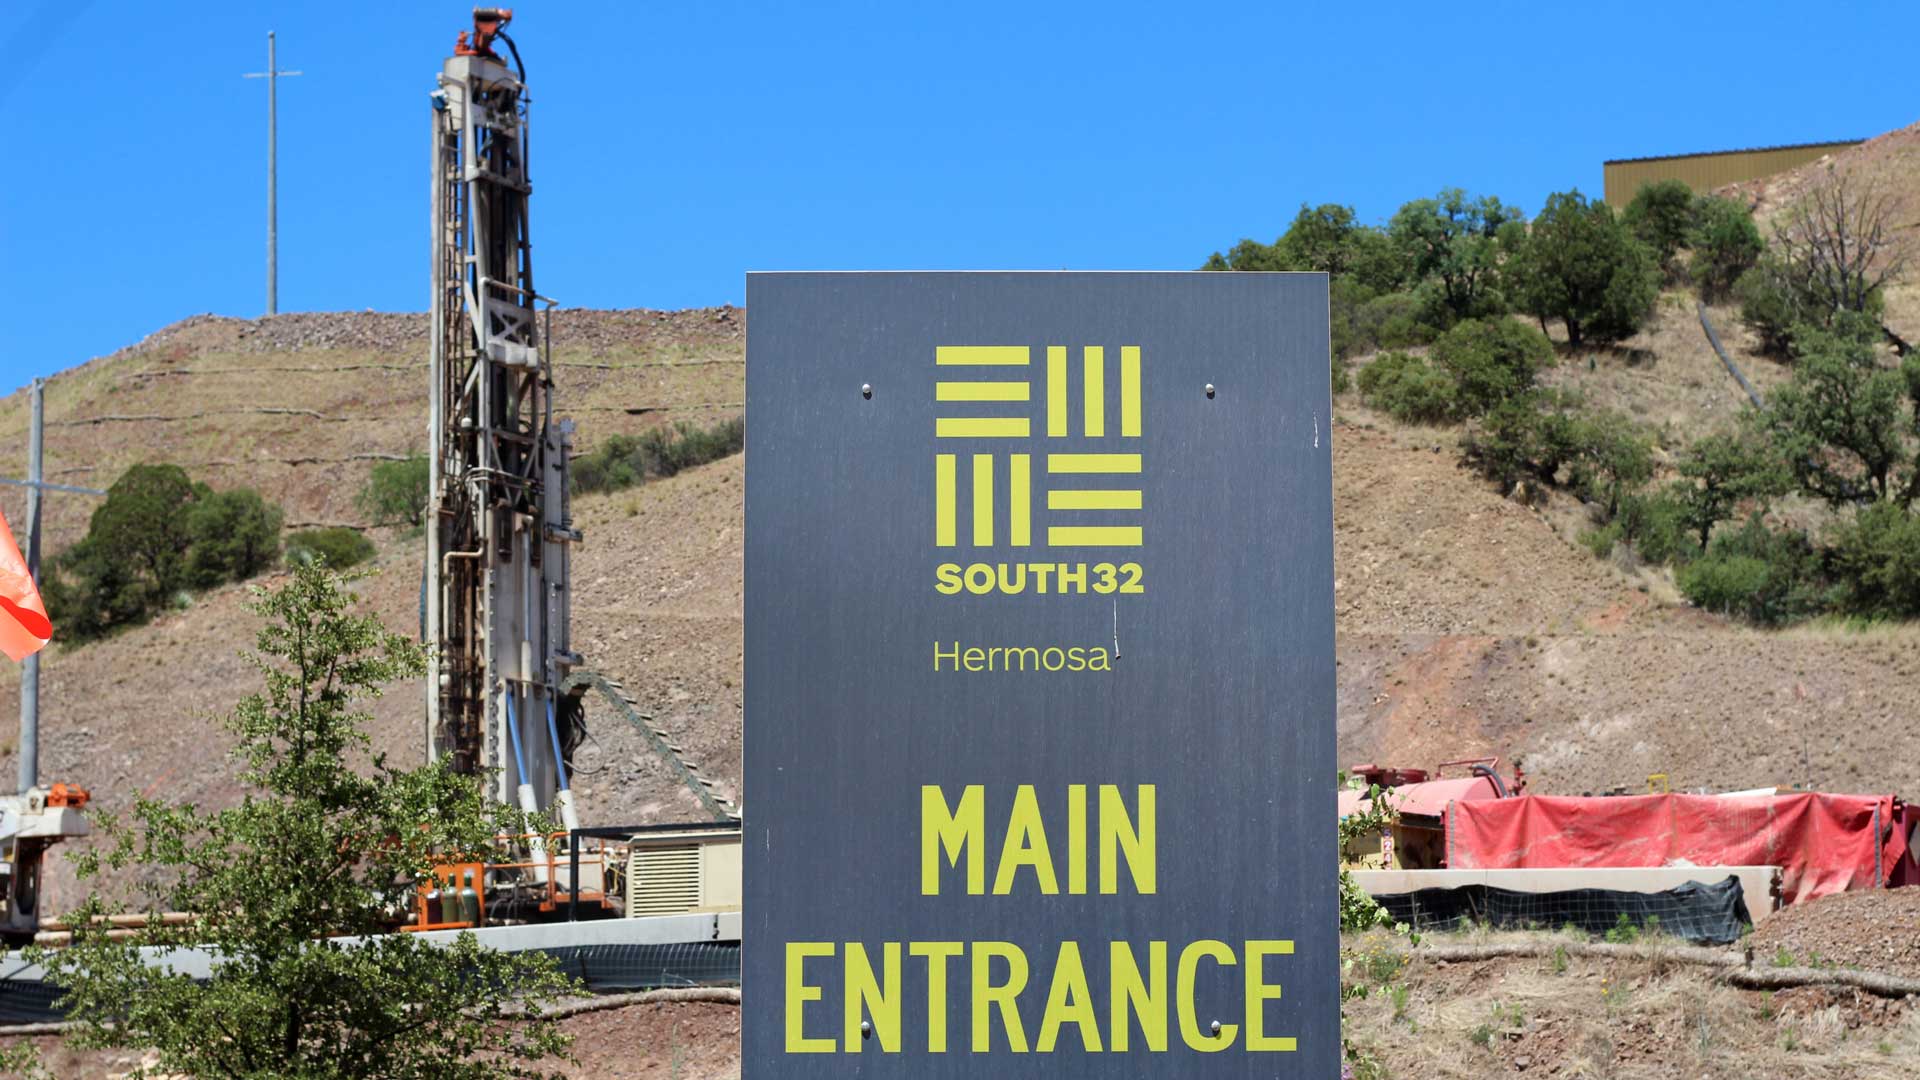 The entrance of the South32 Hermosa mine site, a critical minerals project that looks to source manganese and zinc.